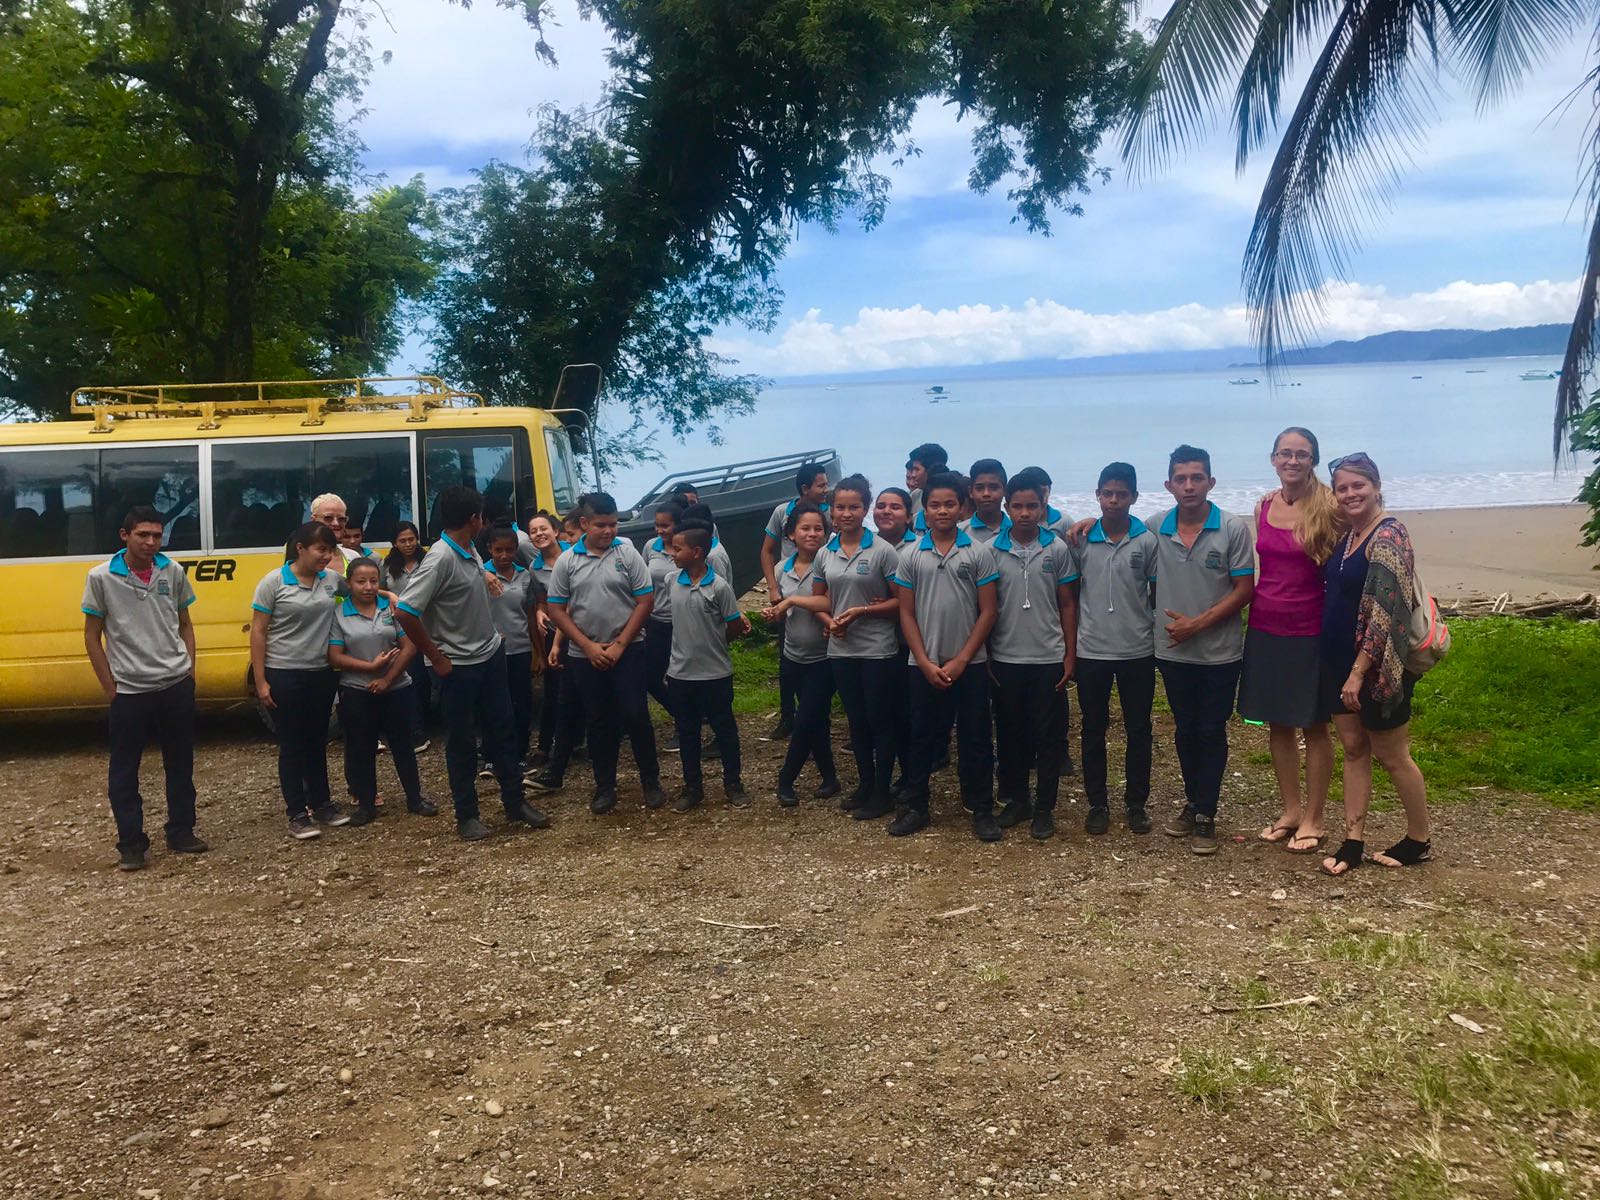 High school students of the drake bay enrichment program supported by LiveGlobally community donations in Costa Rica 2017.